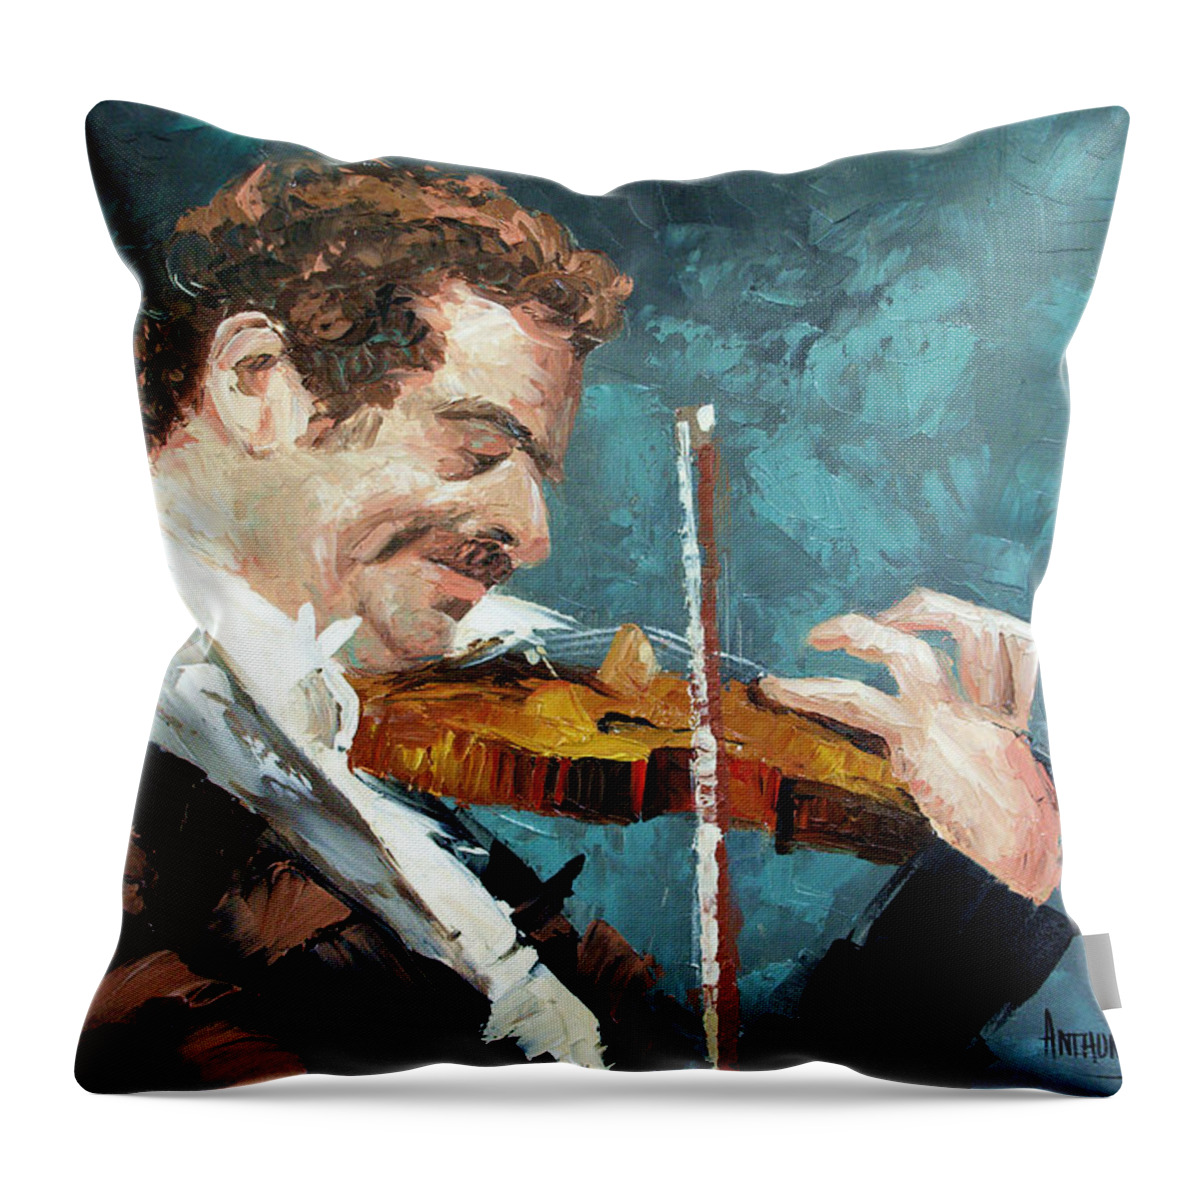 Fiddling Around Framed Prints Throw Pillow featuring the painting Fiddling Around by Anthony Falbo